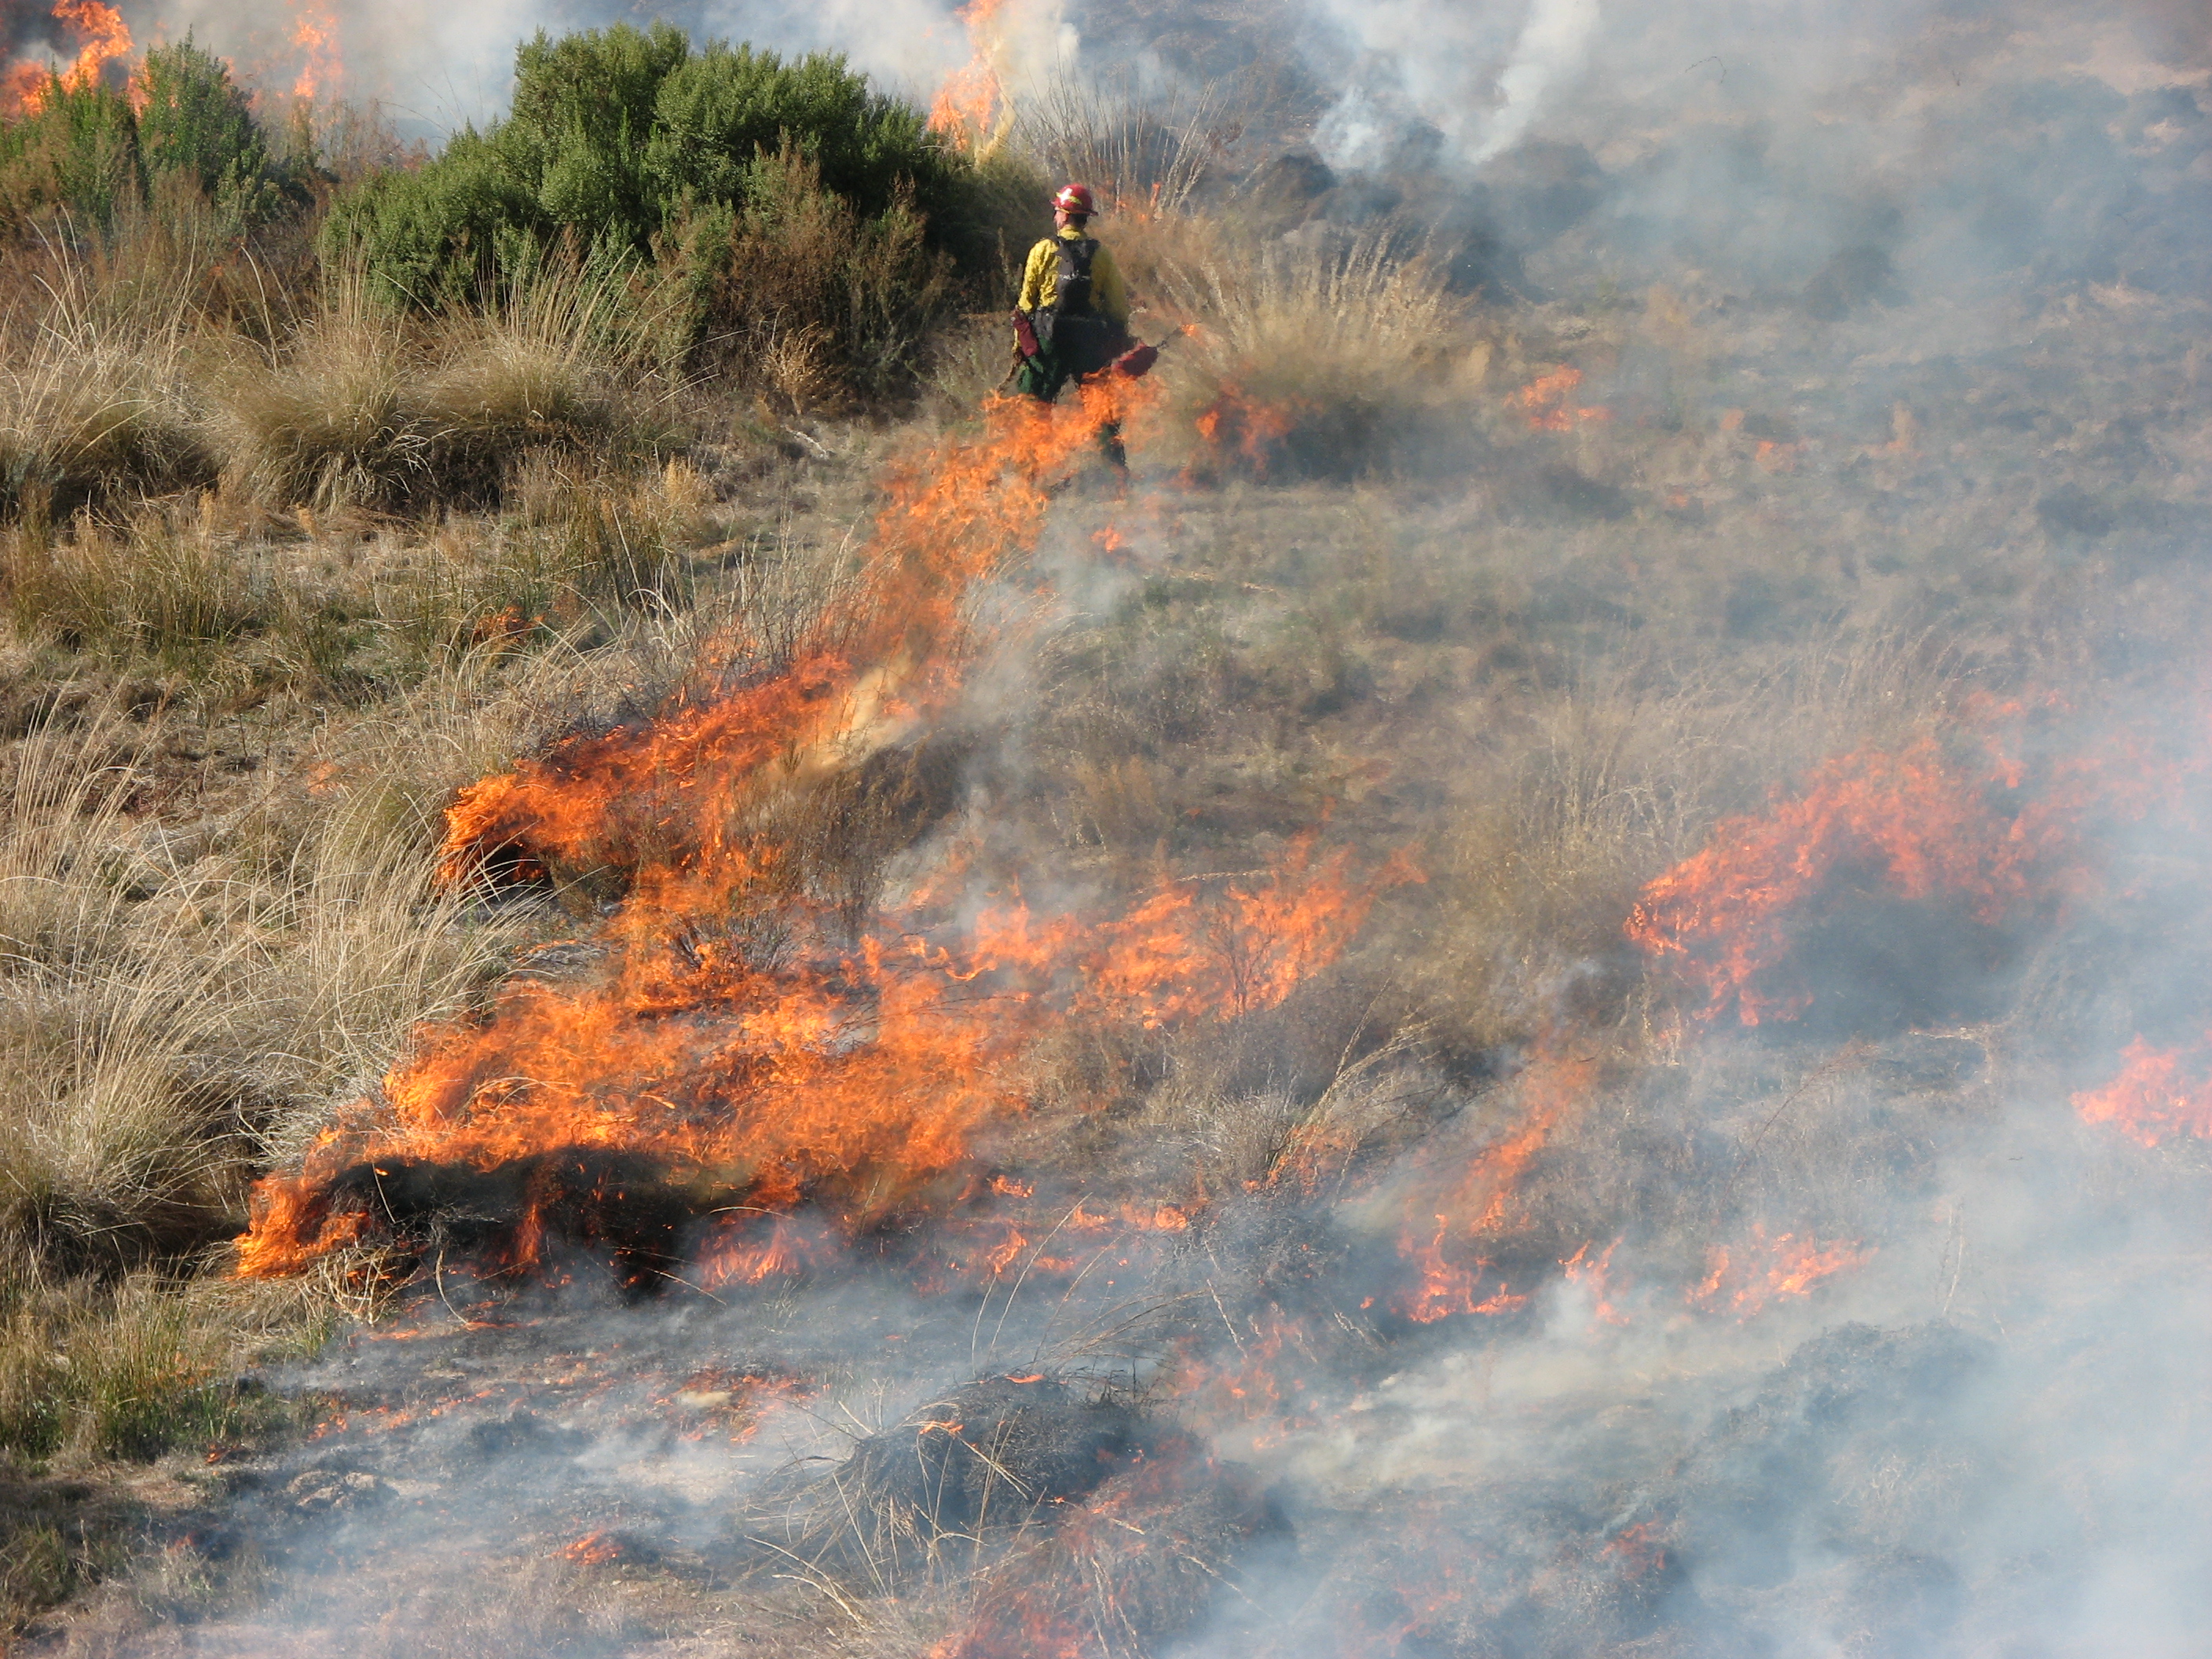 Controlled burn at Pinnacles National Park in December 2011 by Amah Mutsun Tribal Band, UCSC Arboretum, and National Park Service to promote native deergrass restoration. 